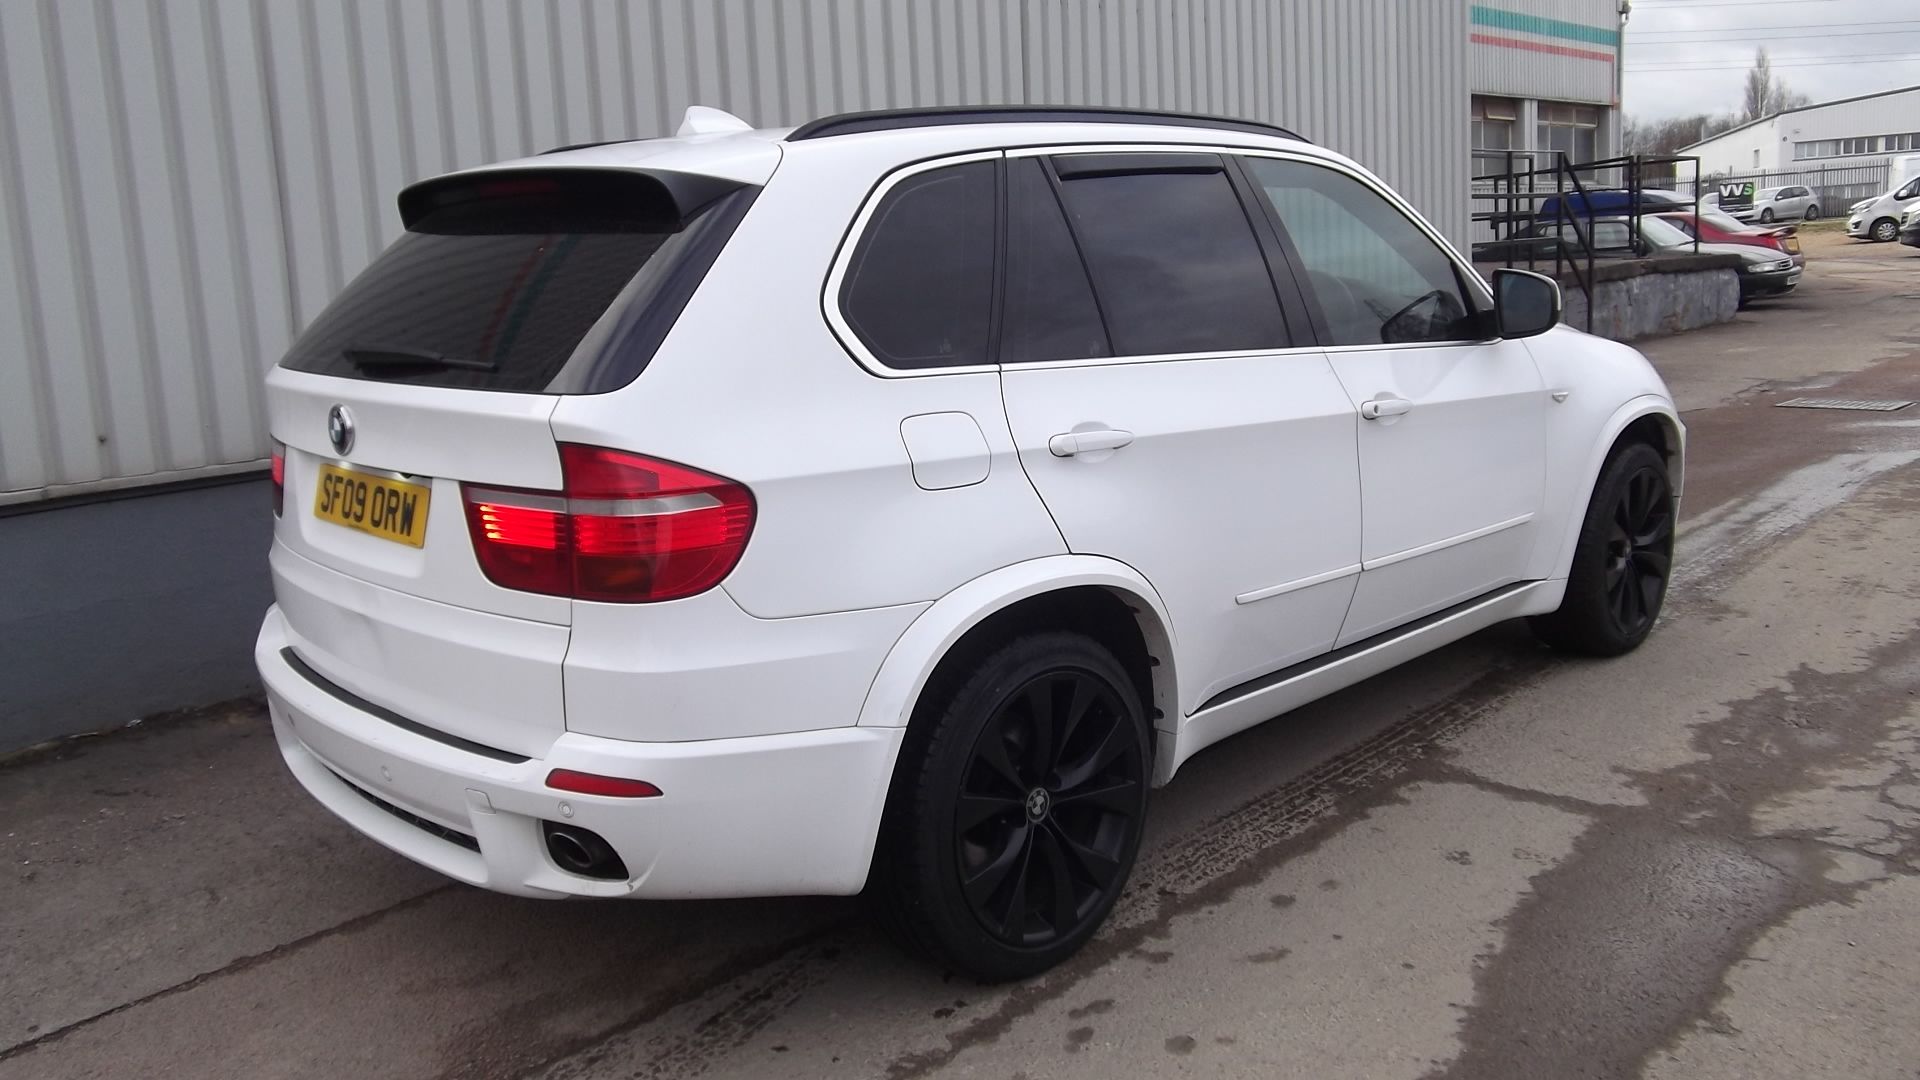 2009 BMW X5 35D M Sport X Drive 3.0 5 Dr 4x4 - CL505 - NO VAT ON THE HAMM - Image 9 of 22